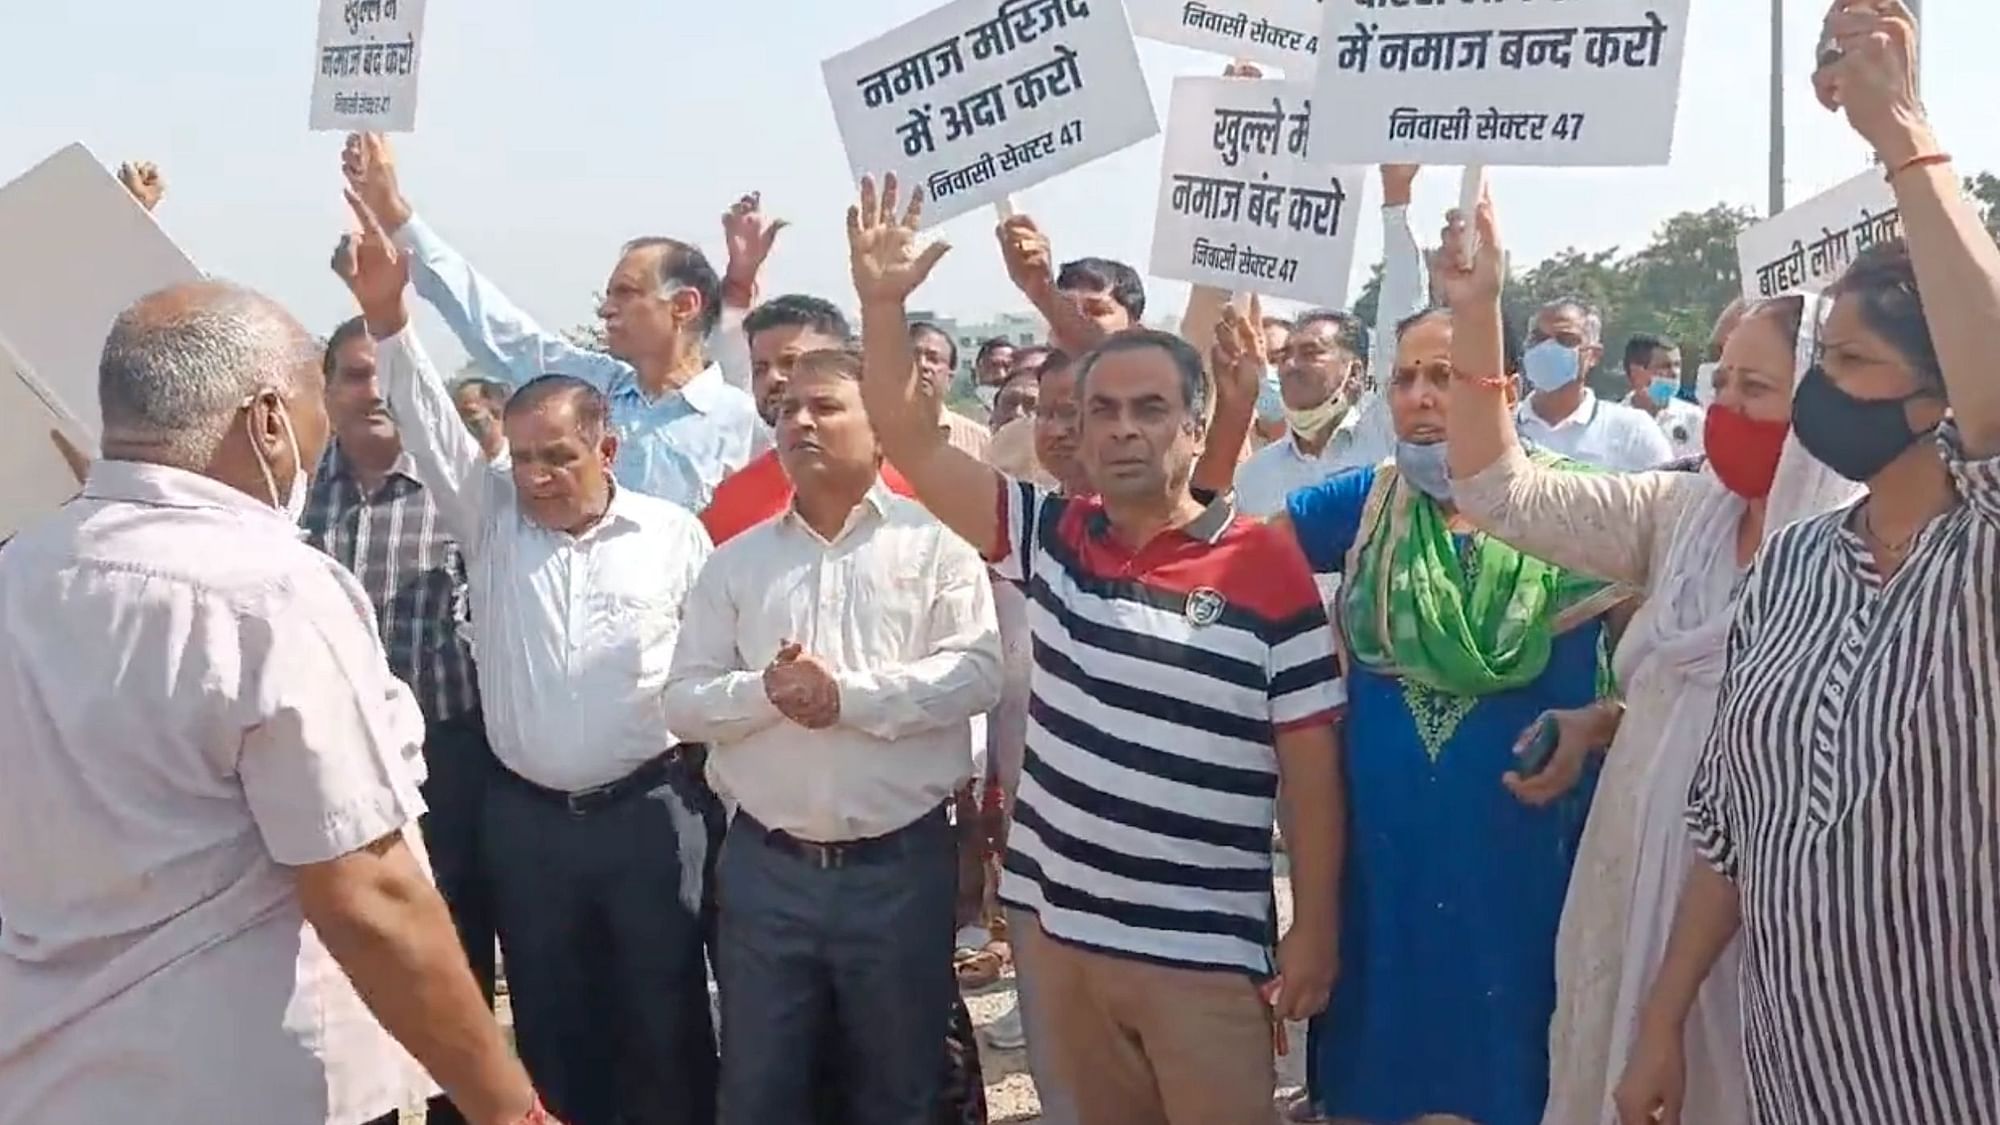 <div class="paragraphs"><p>Residents of Gurgaon’s sector 47 protesting against the offering of namaz in an open designated site.</p></div>